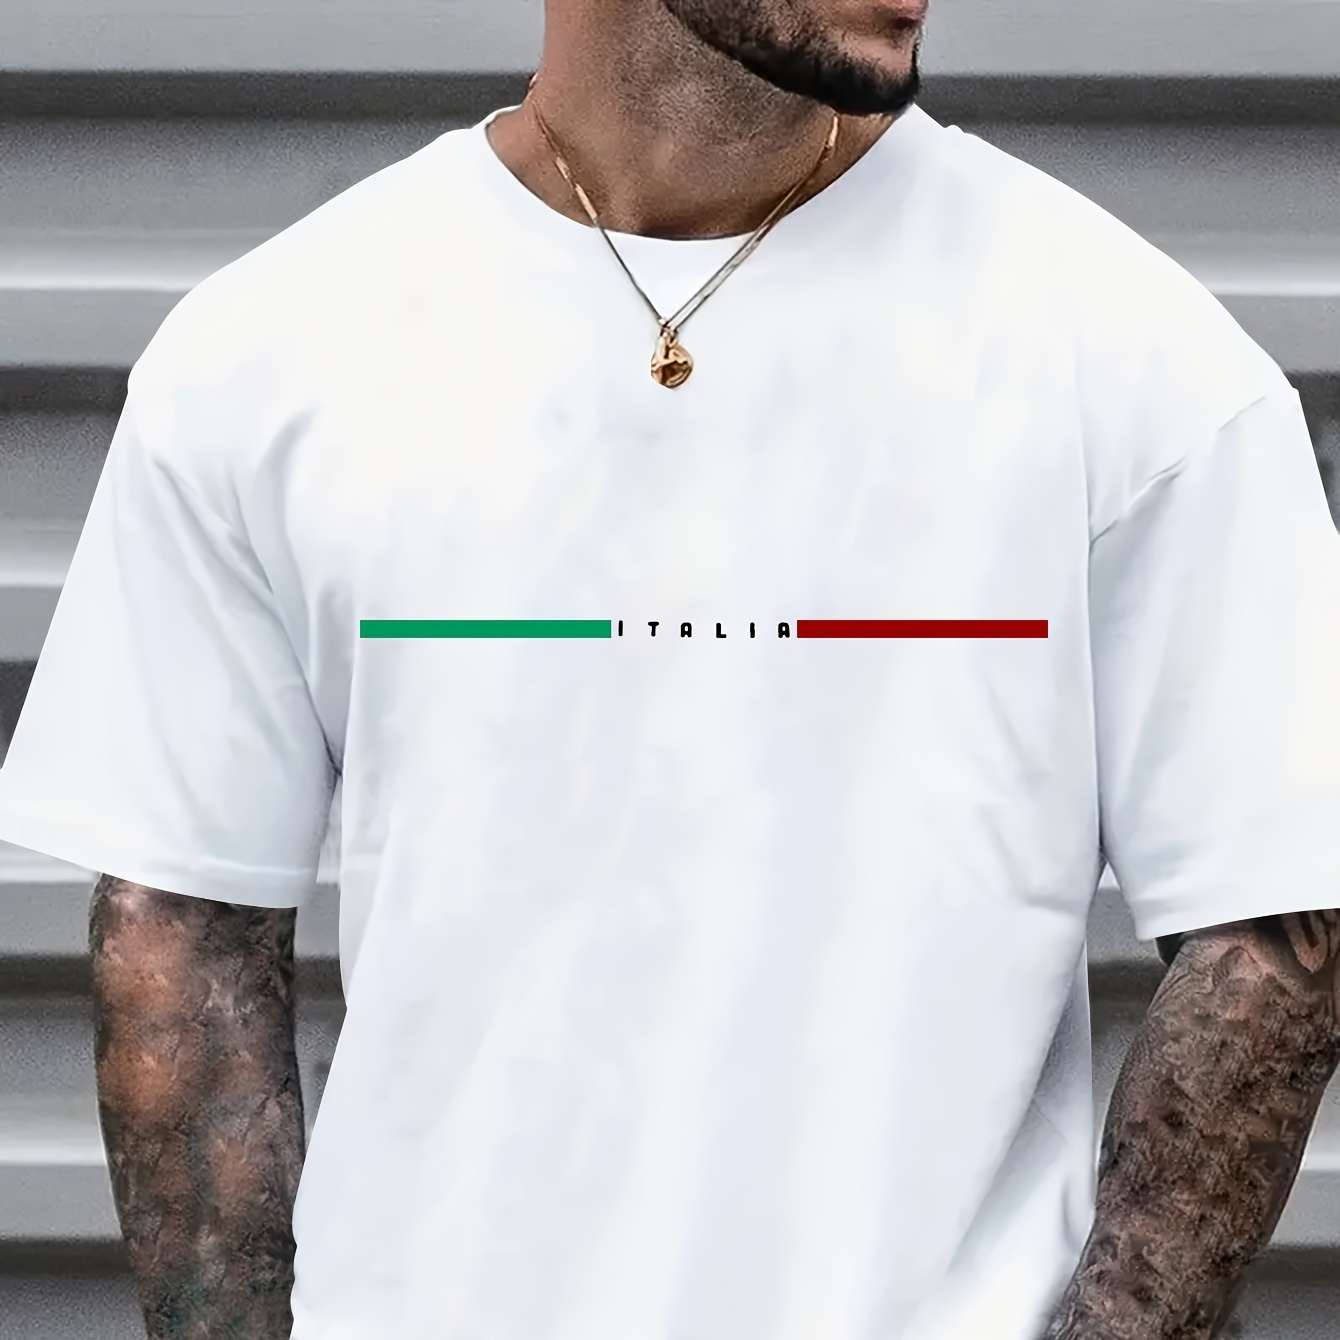 

Paris" Creative Print Casual Novelty T-shirt For Men, Short Sleeve Summer& Spring Top, Comfort Fit, Stylish Streetwear Crew Neck Tee For Daily Wear